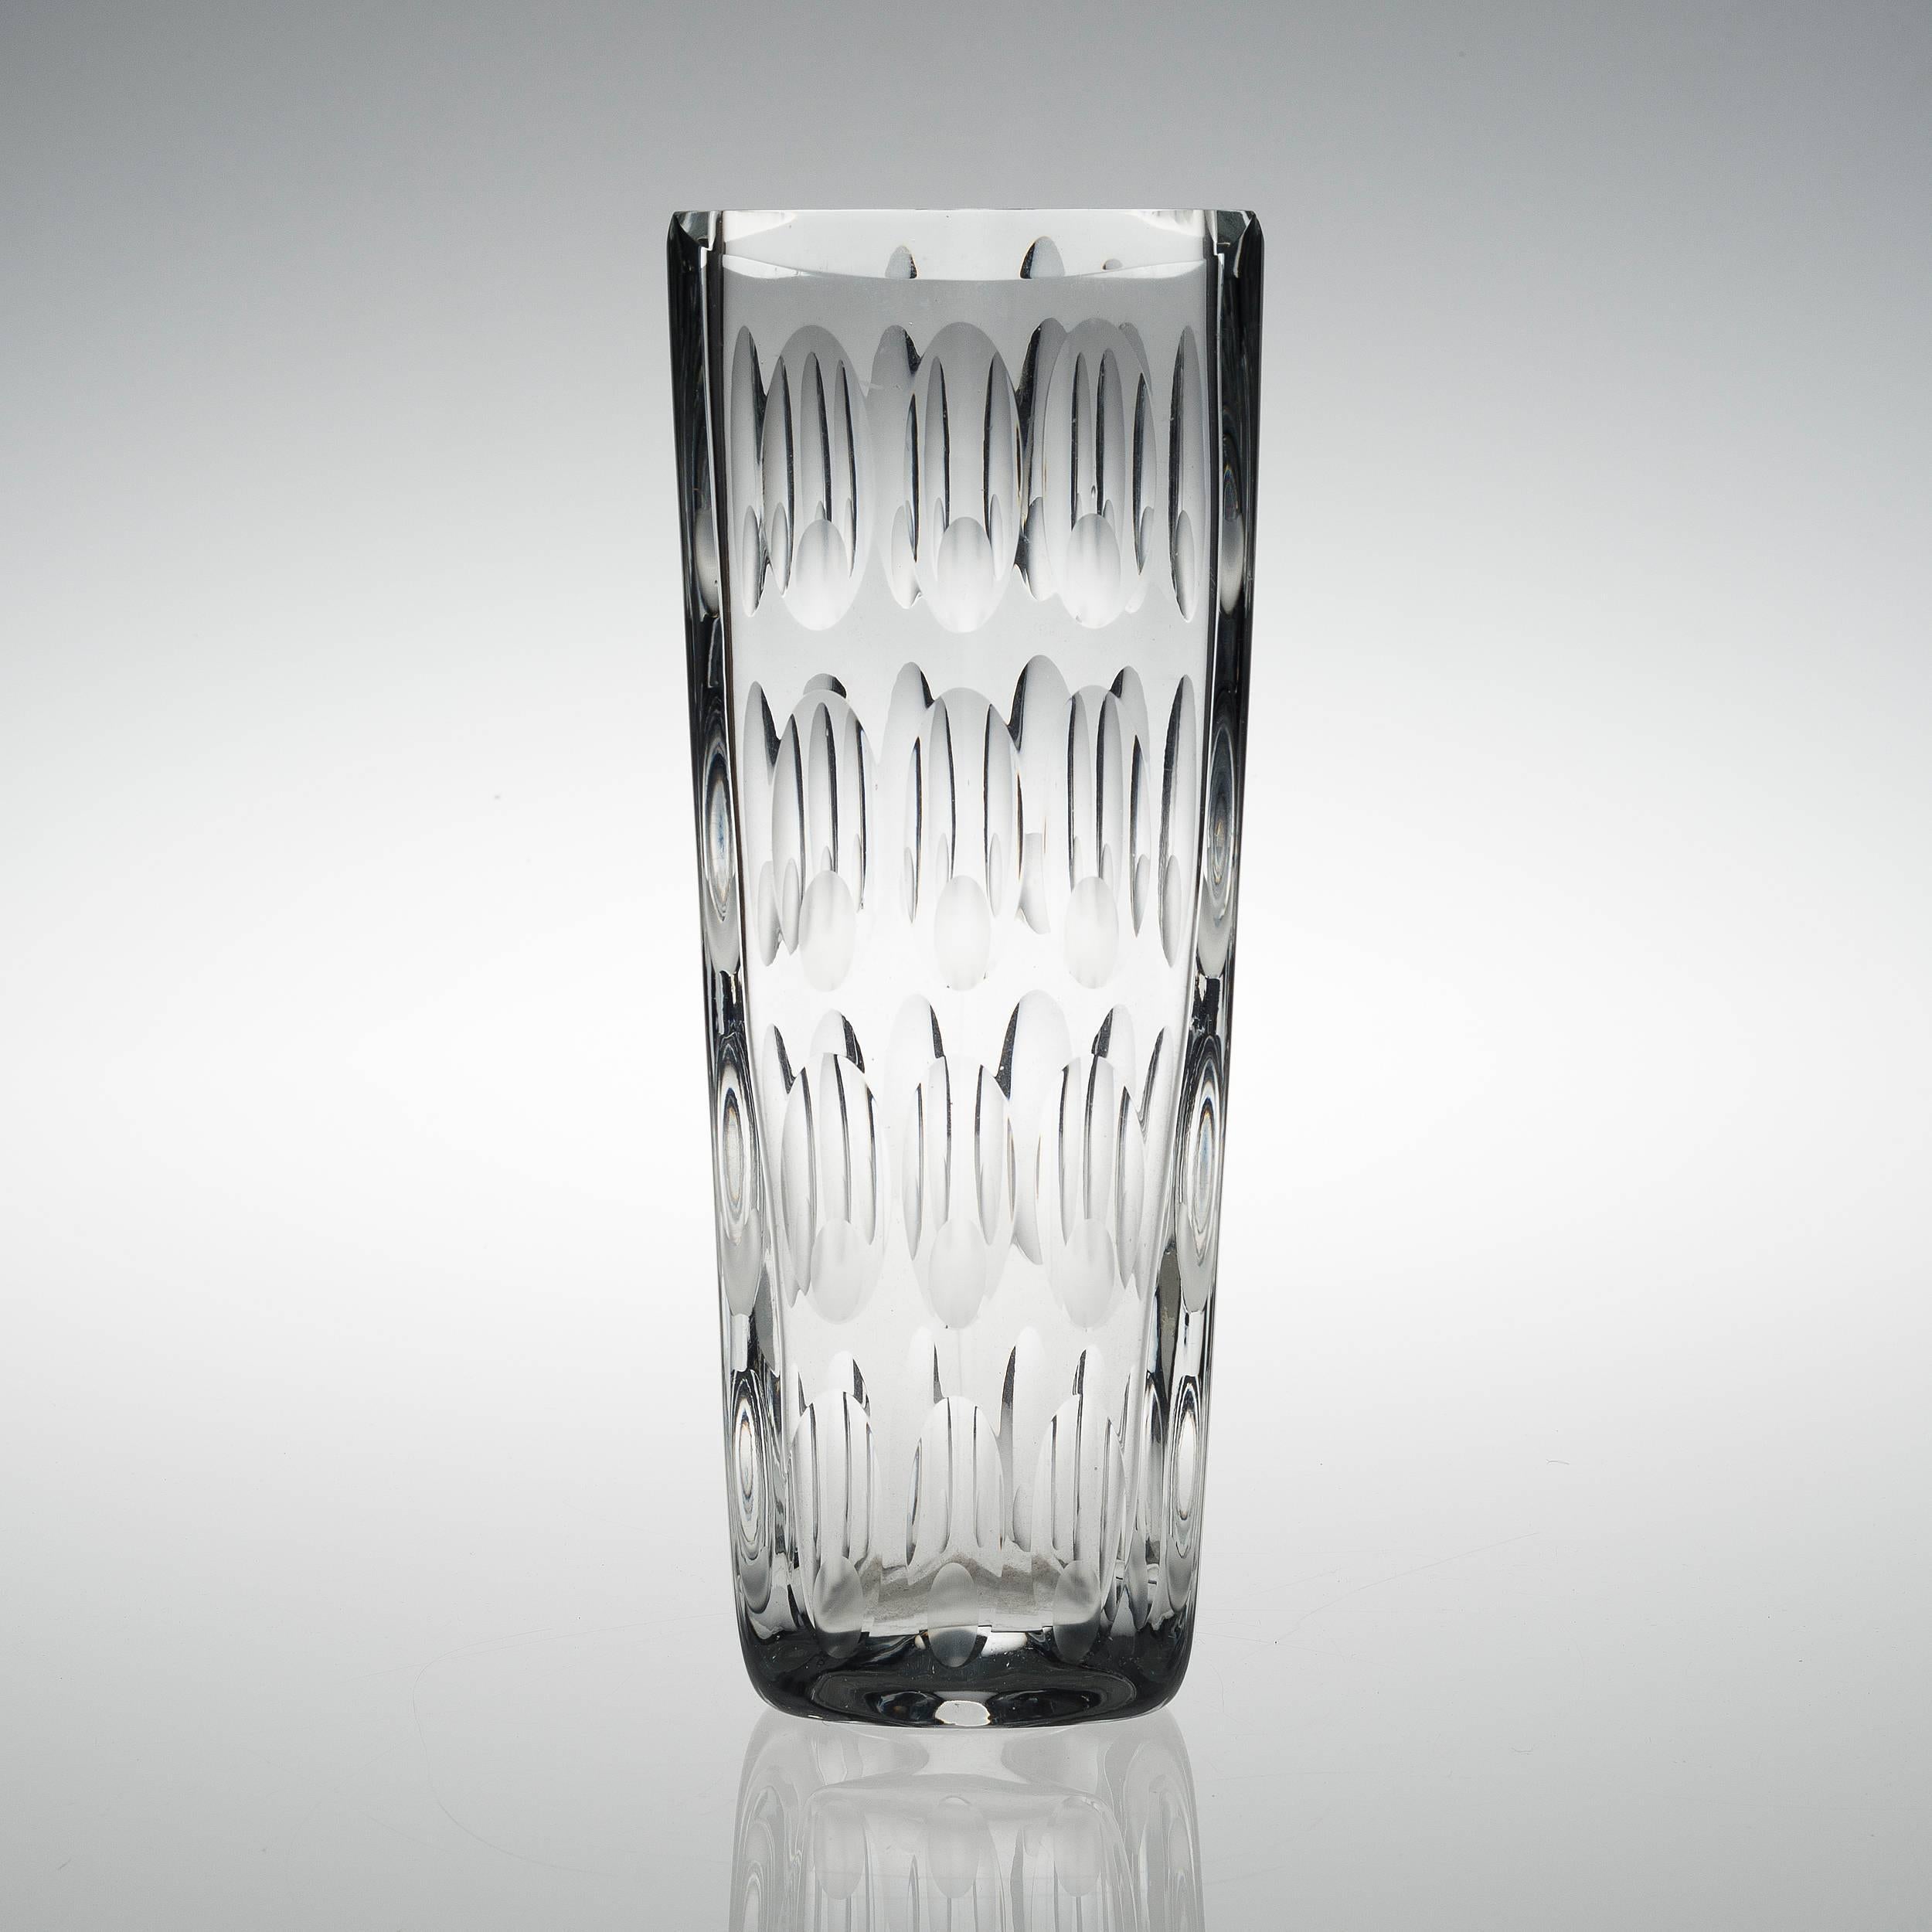 A 1956 large vase designed by Saara Hopea. Clear cut-glass, excellent condition. Height 32 cm.
Shipping to anywhere in the world: Up to 150 Euros. Complimentary to certain destinations.
 